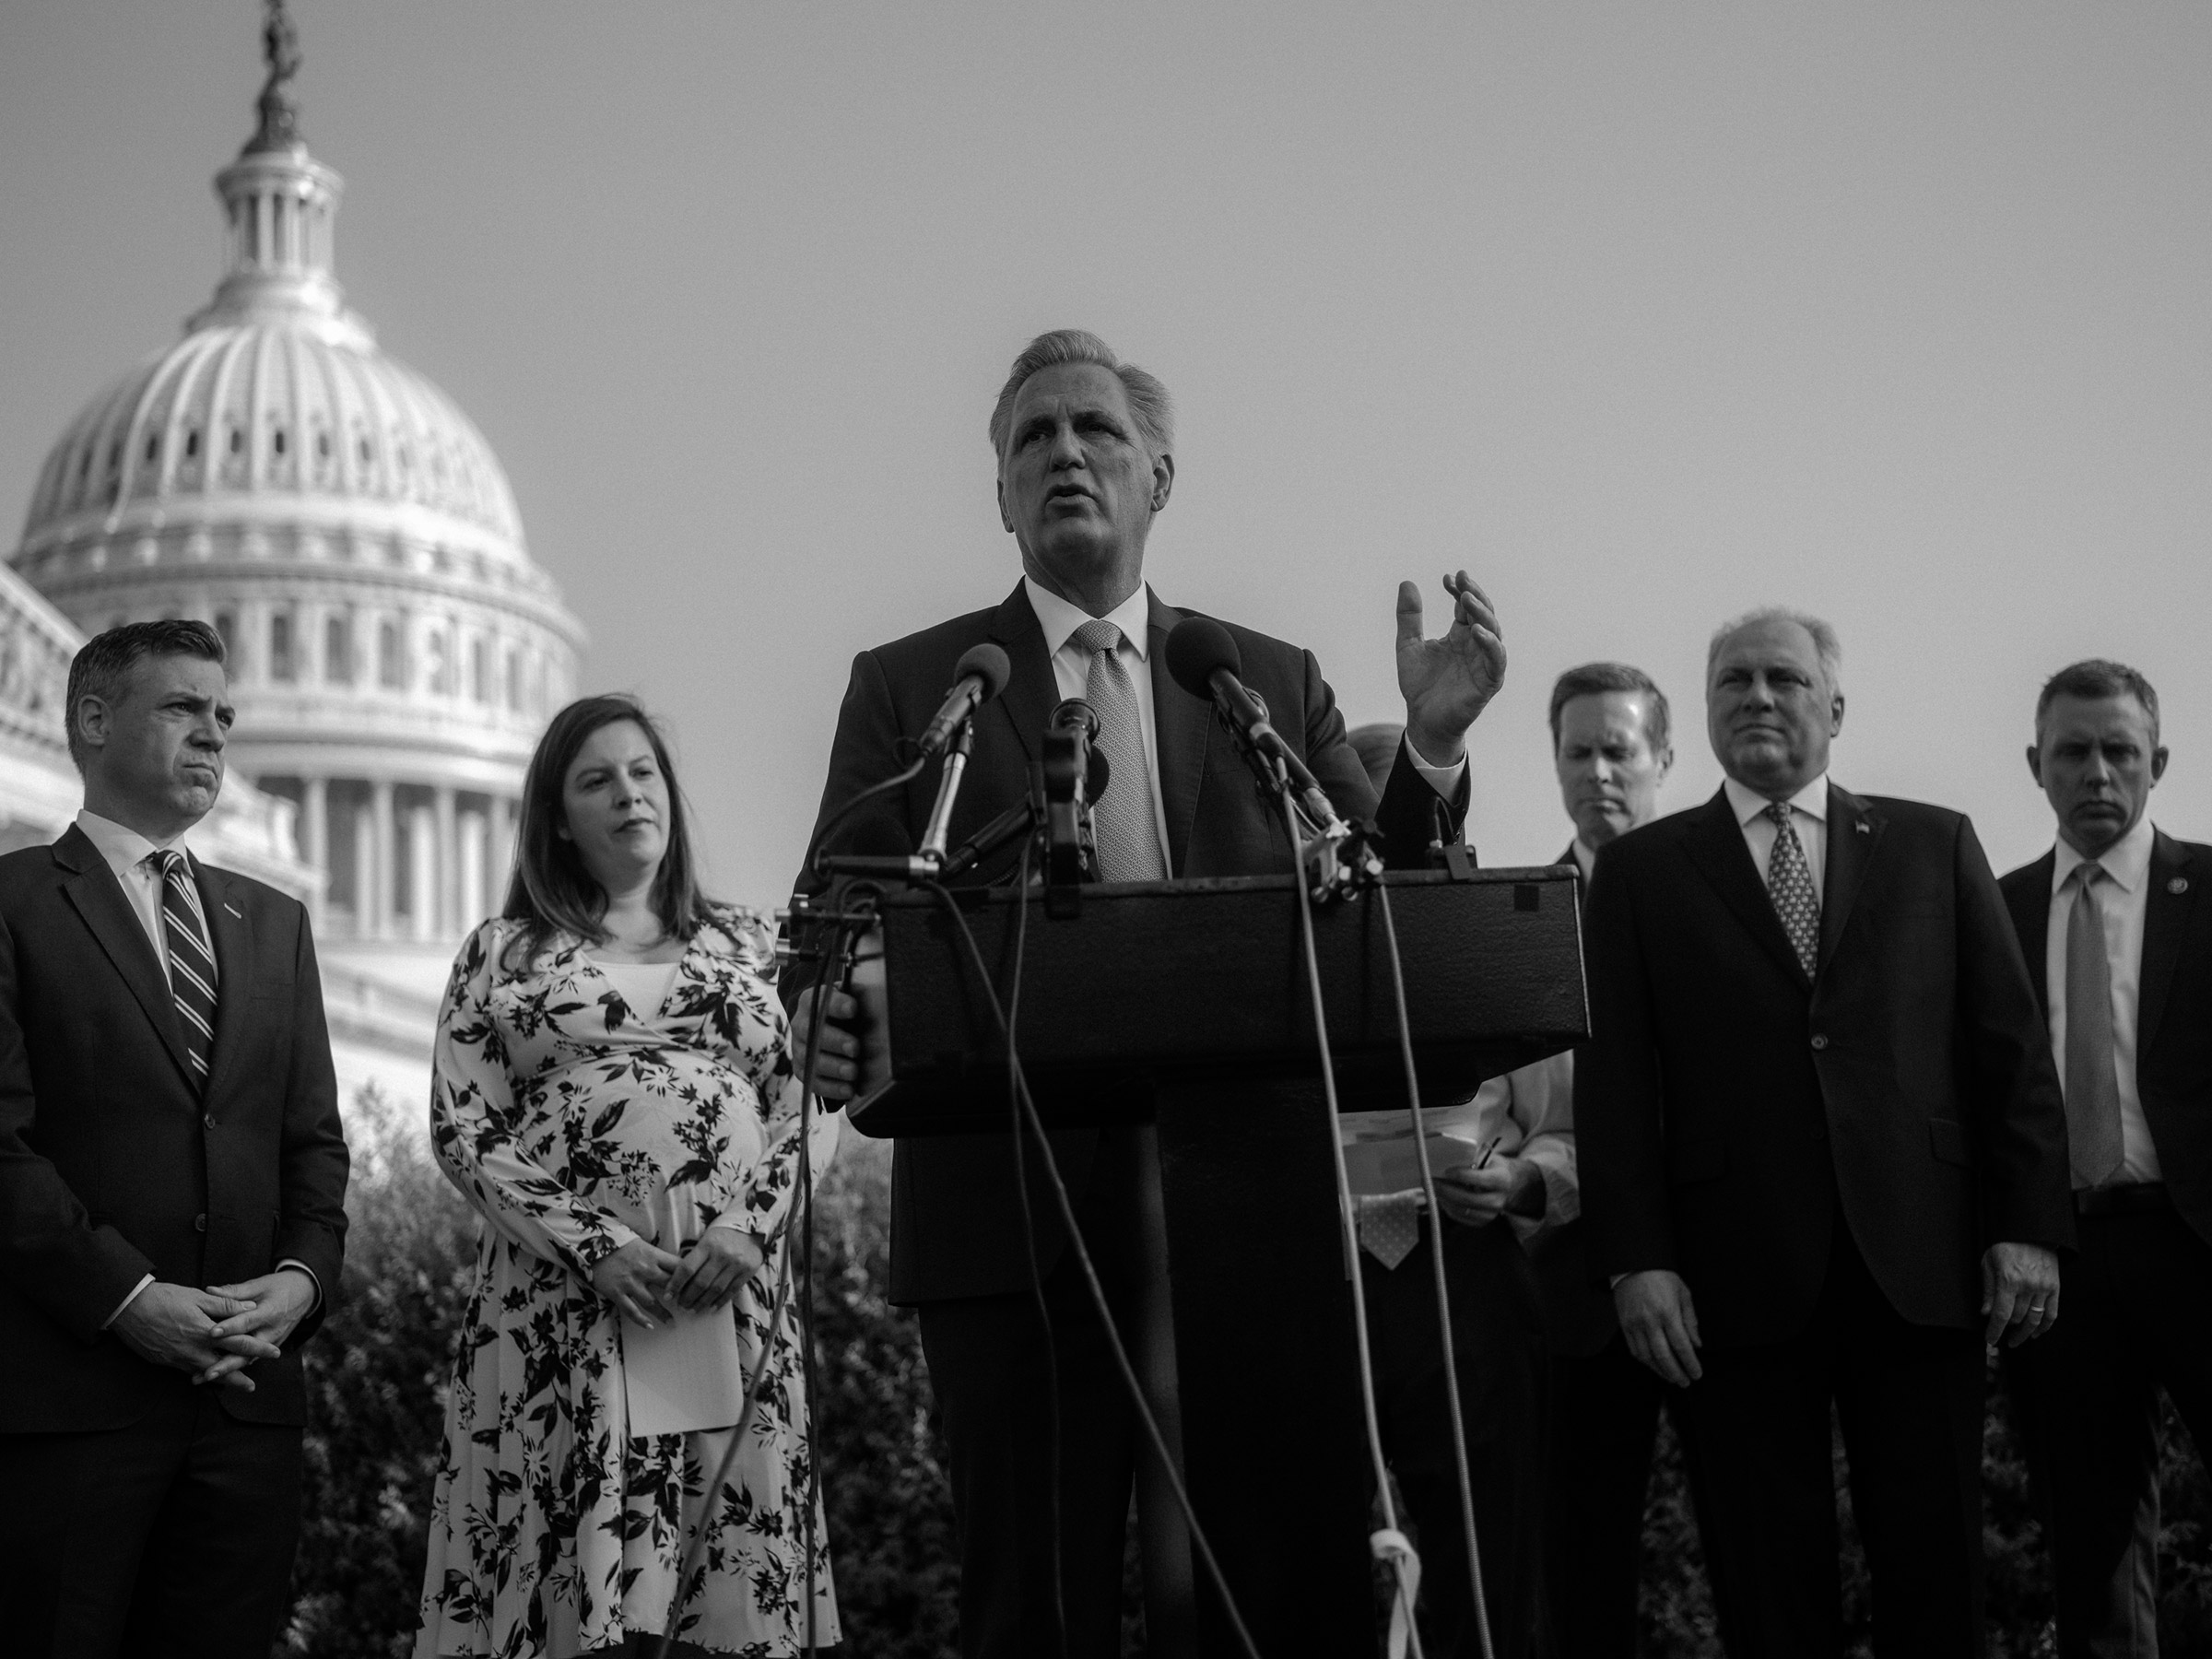 House GOP leader Kevin McCarthy, center, and his colleagues have tried to distort the truth about Jan. 6. (Christopher Lee for TIME)